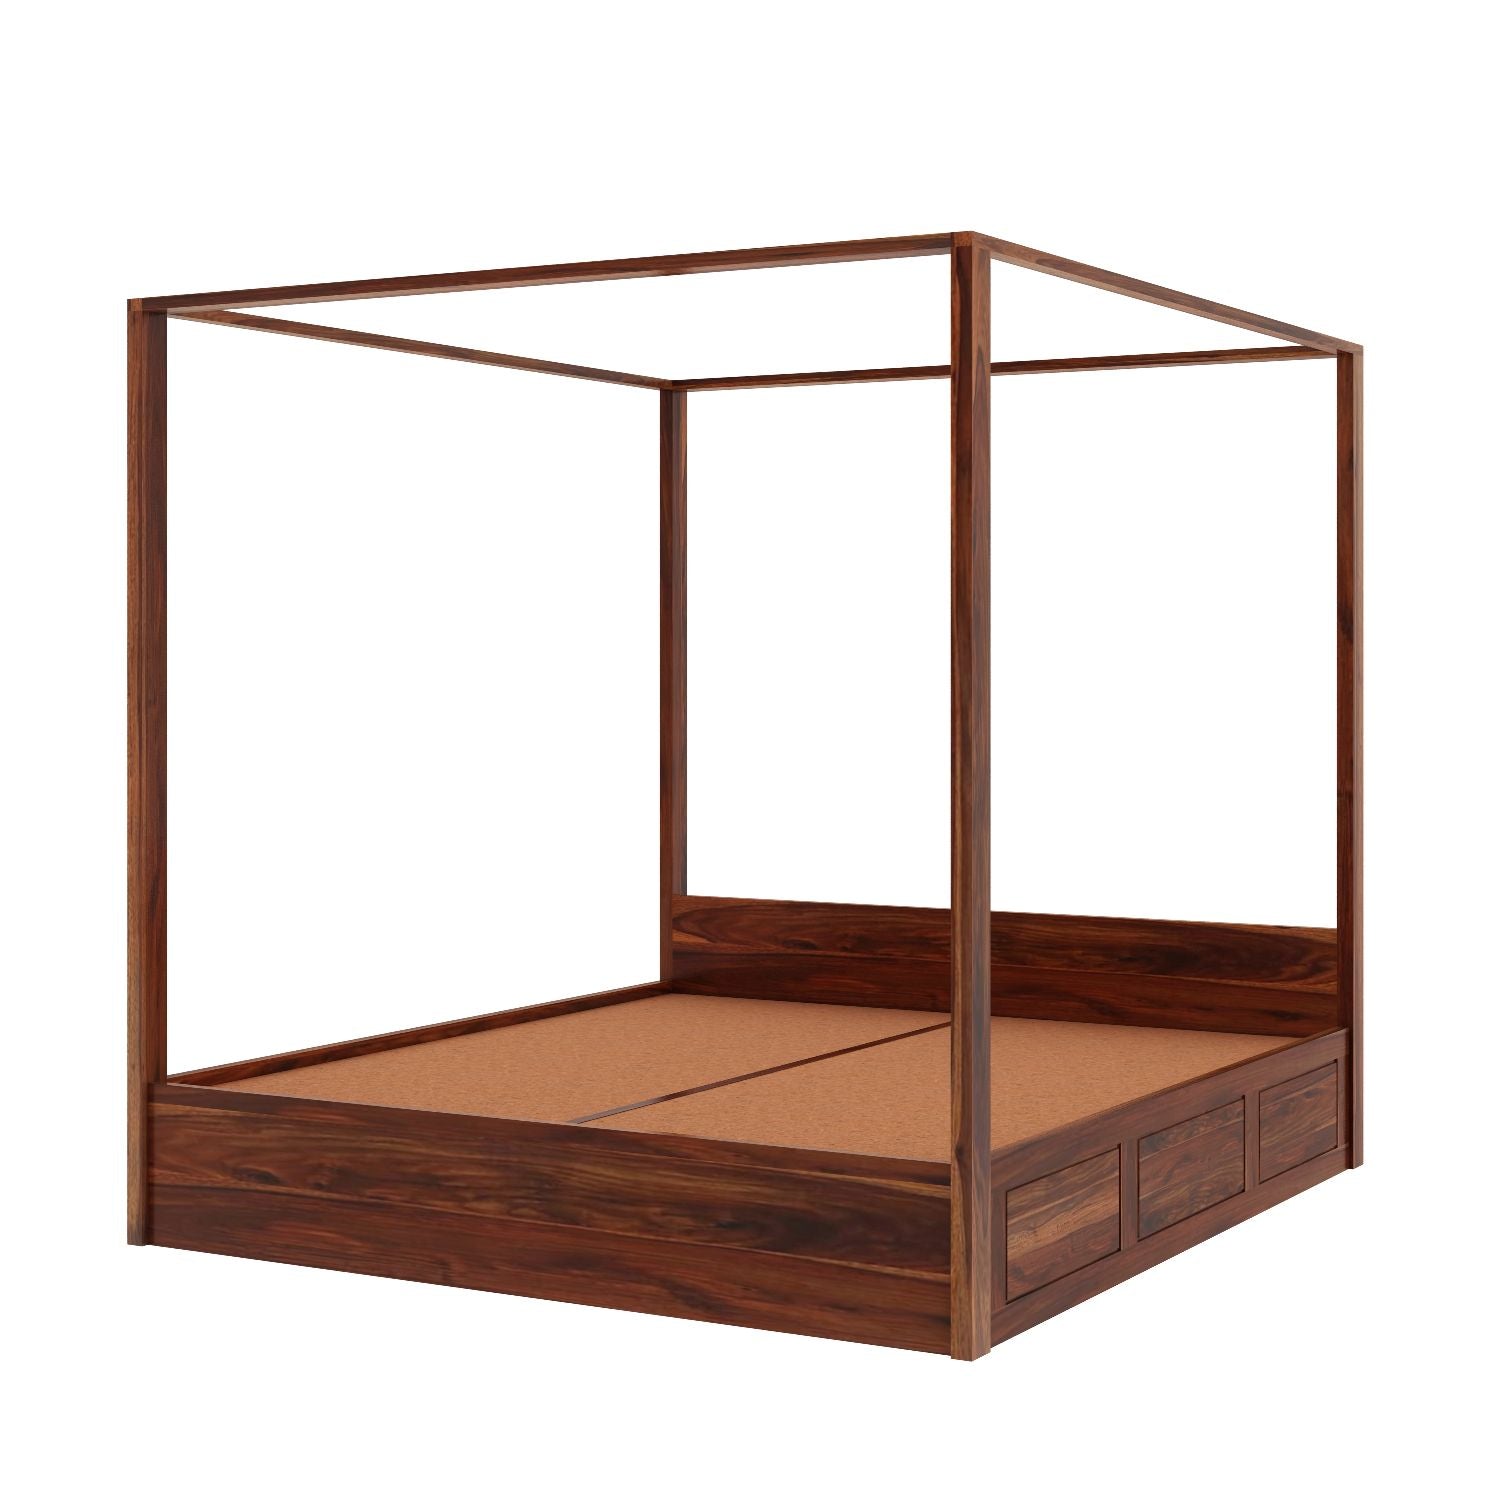 Solivo Solid Sheesham Wood Poster Bed With Box Storage (King Size, Natural Finish)